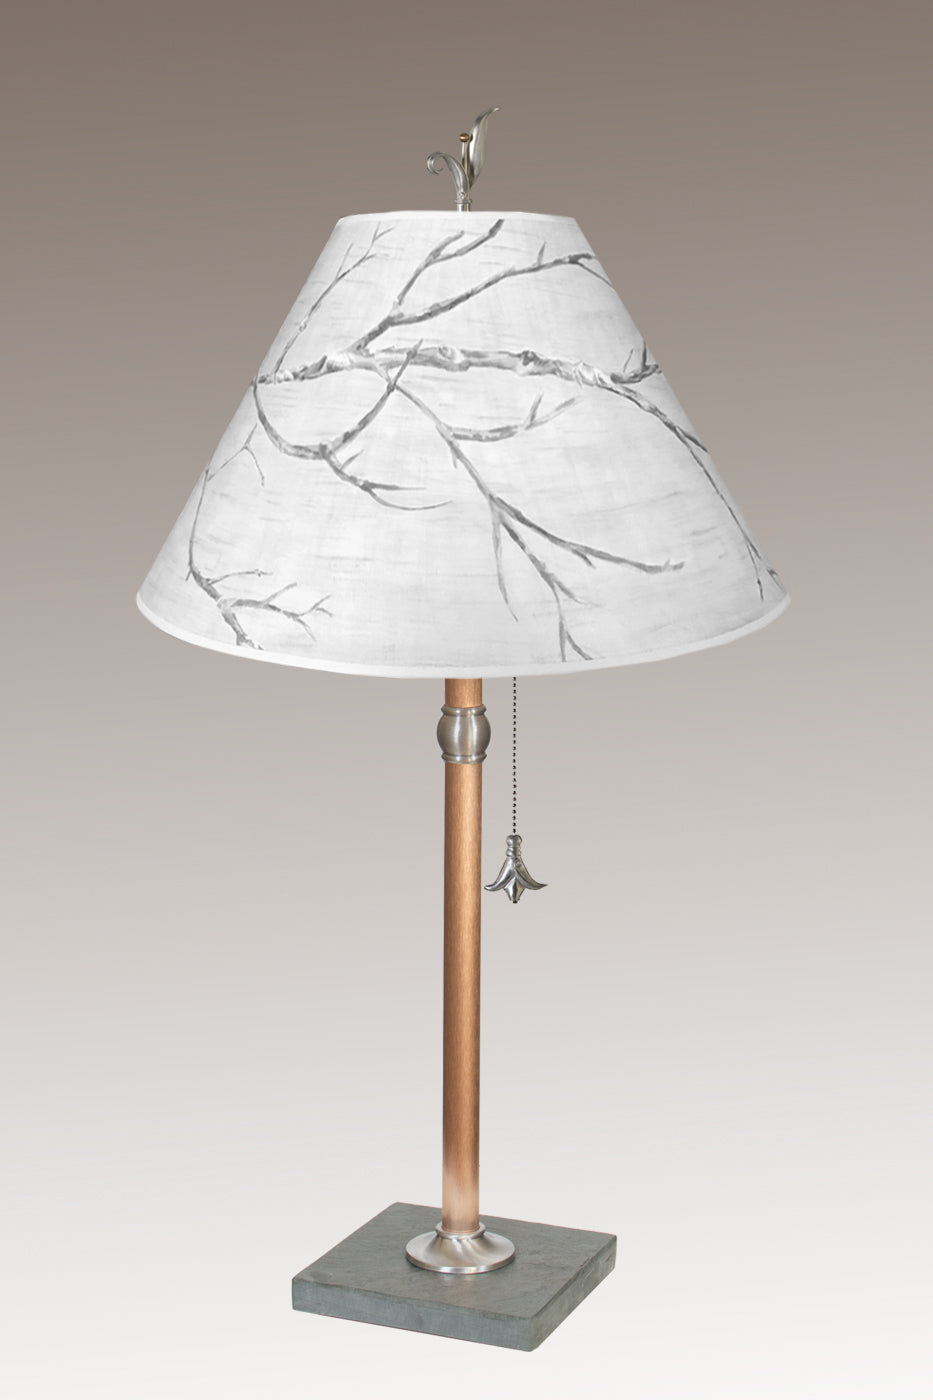 Janna Ugone & Co Table Lamps Copper Table Lamp with Medium Conical Shade in Sweeping Branch